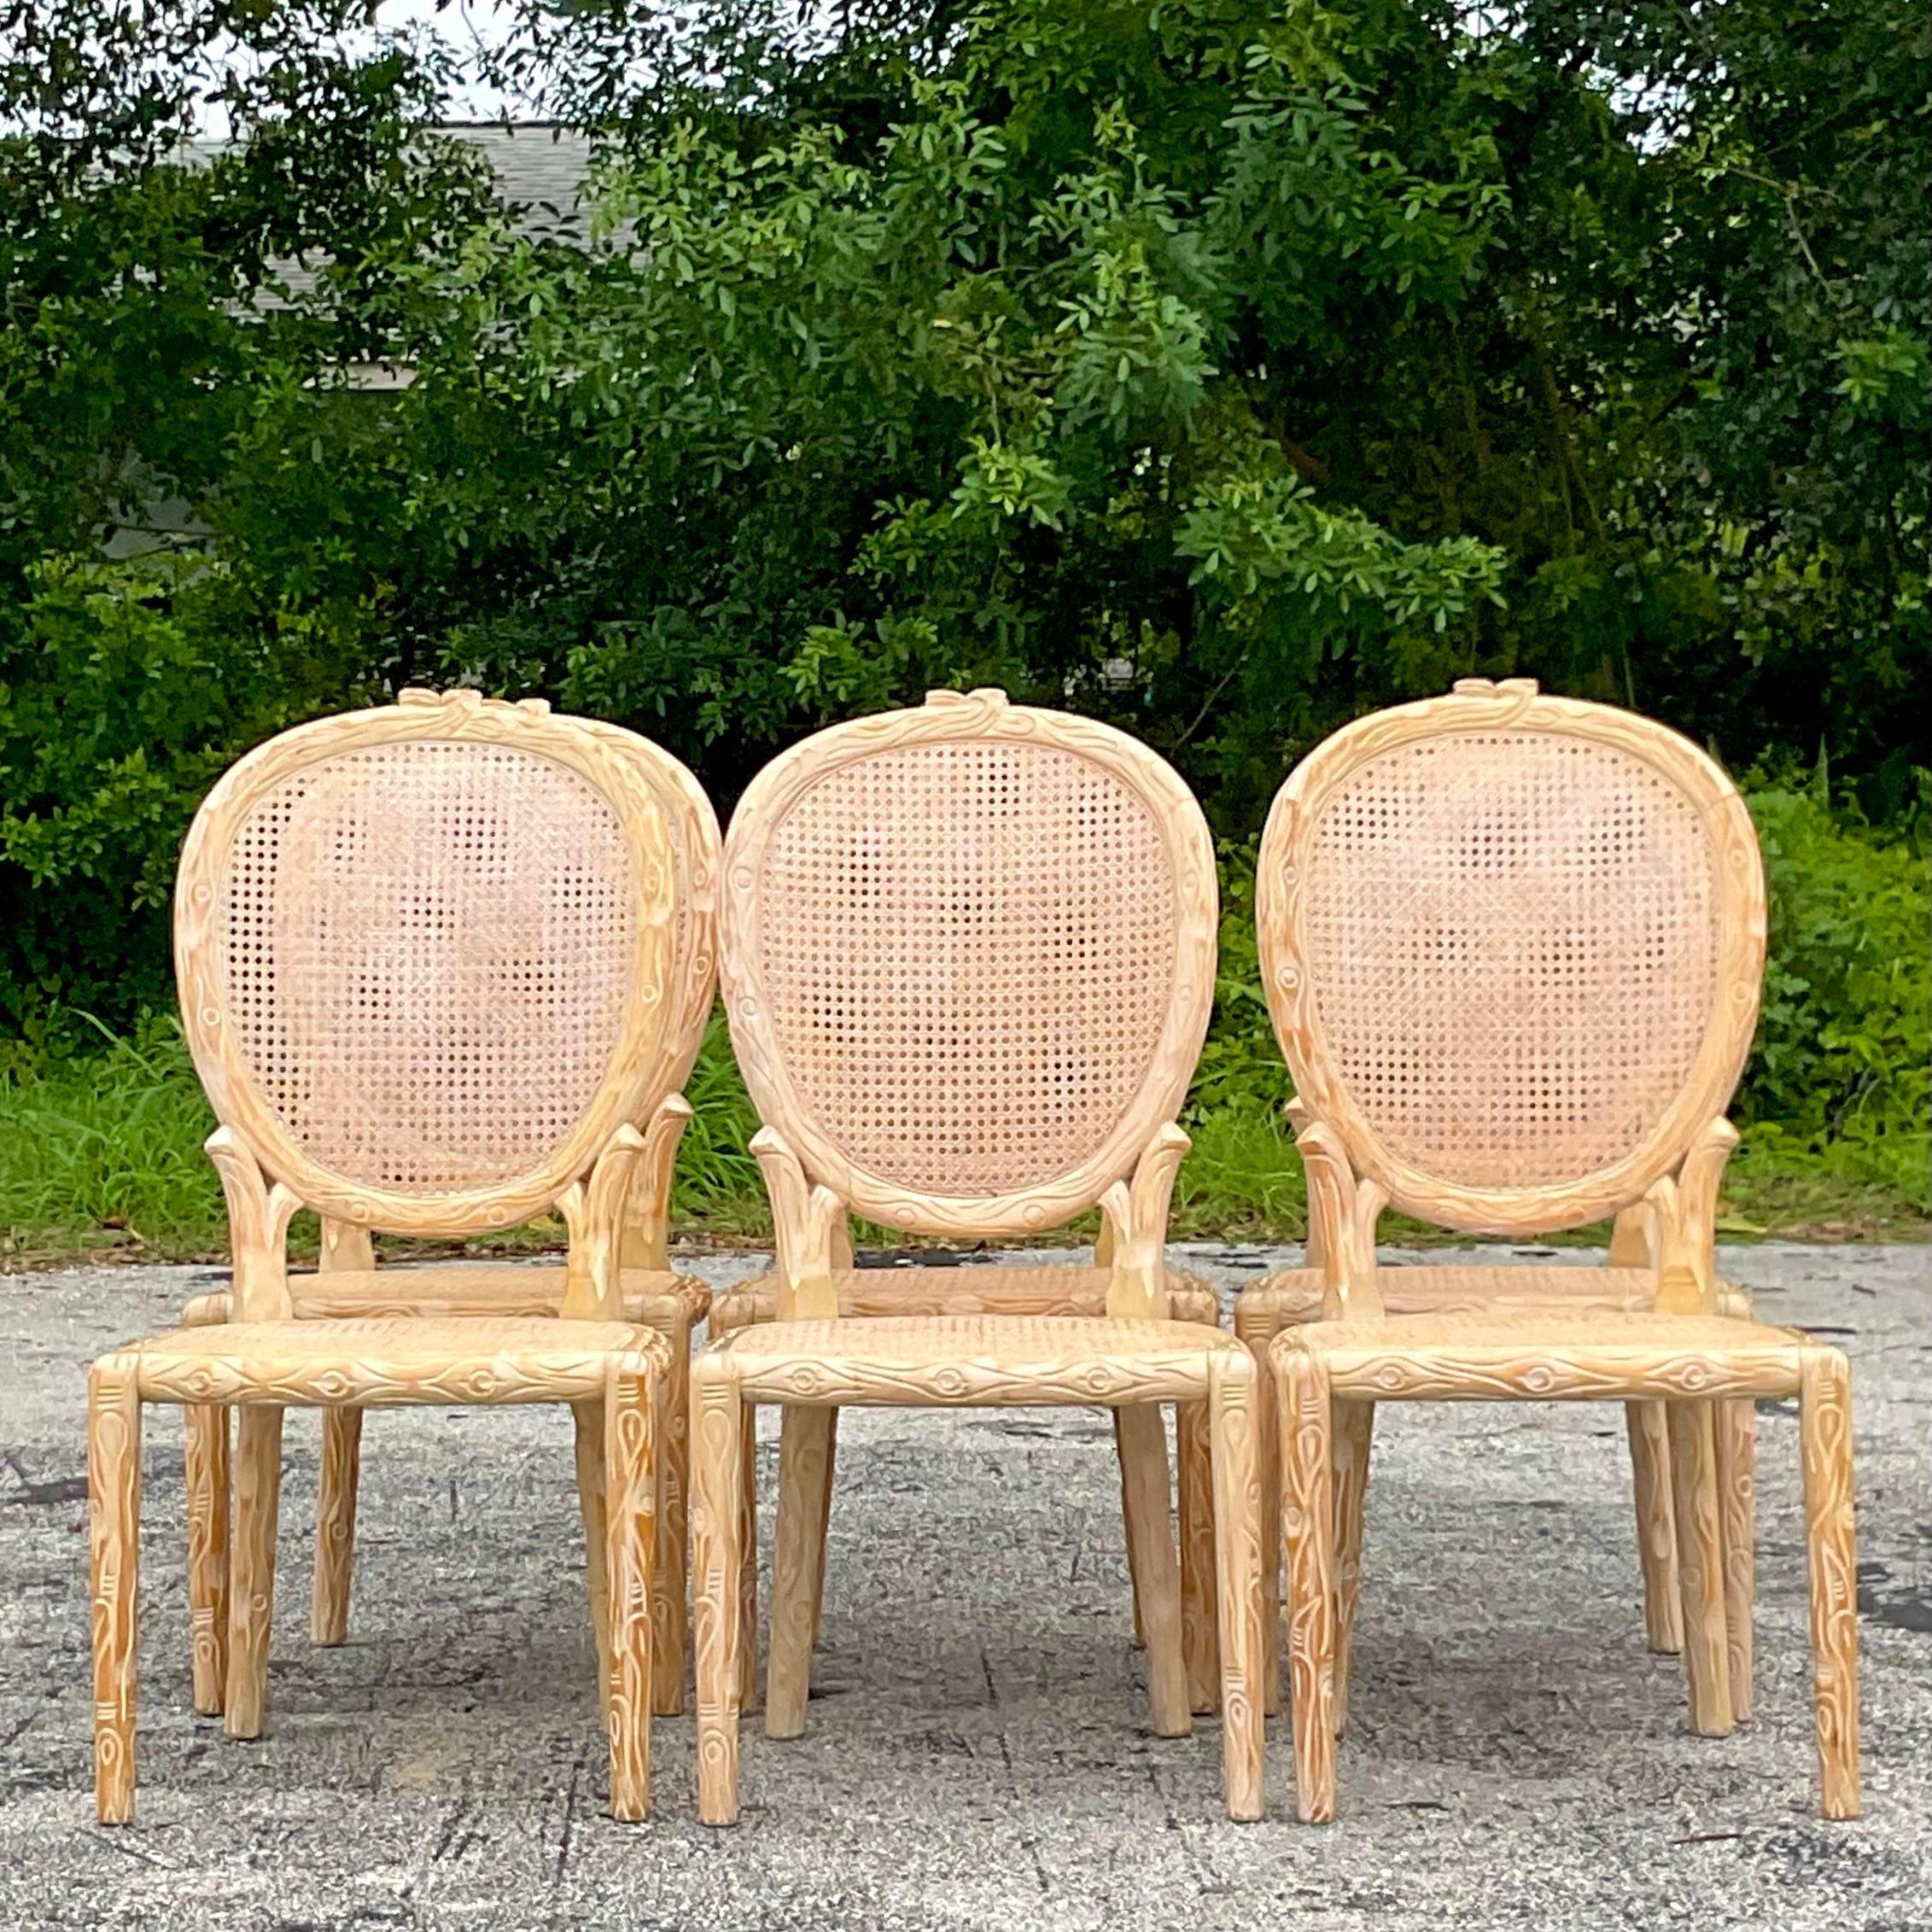 A fabulous set of 6 vintage Boho dining chairs. Beautiful hand carved Faux Bois design with a chic cerused finish. An inset cane seat and back medallion. Acquired from a Palm Beach estate